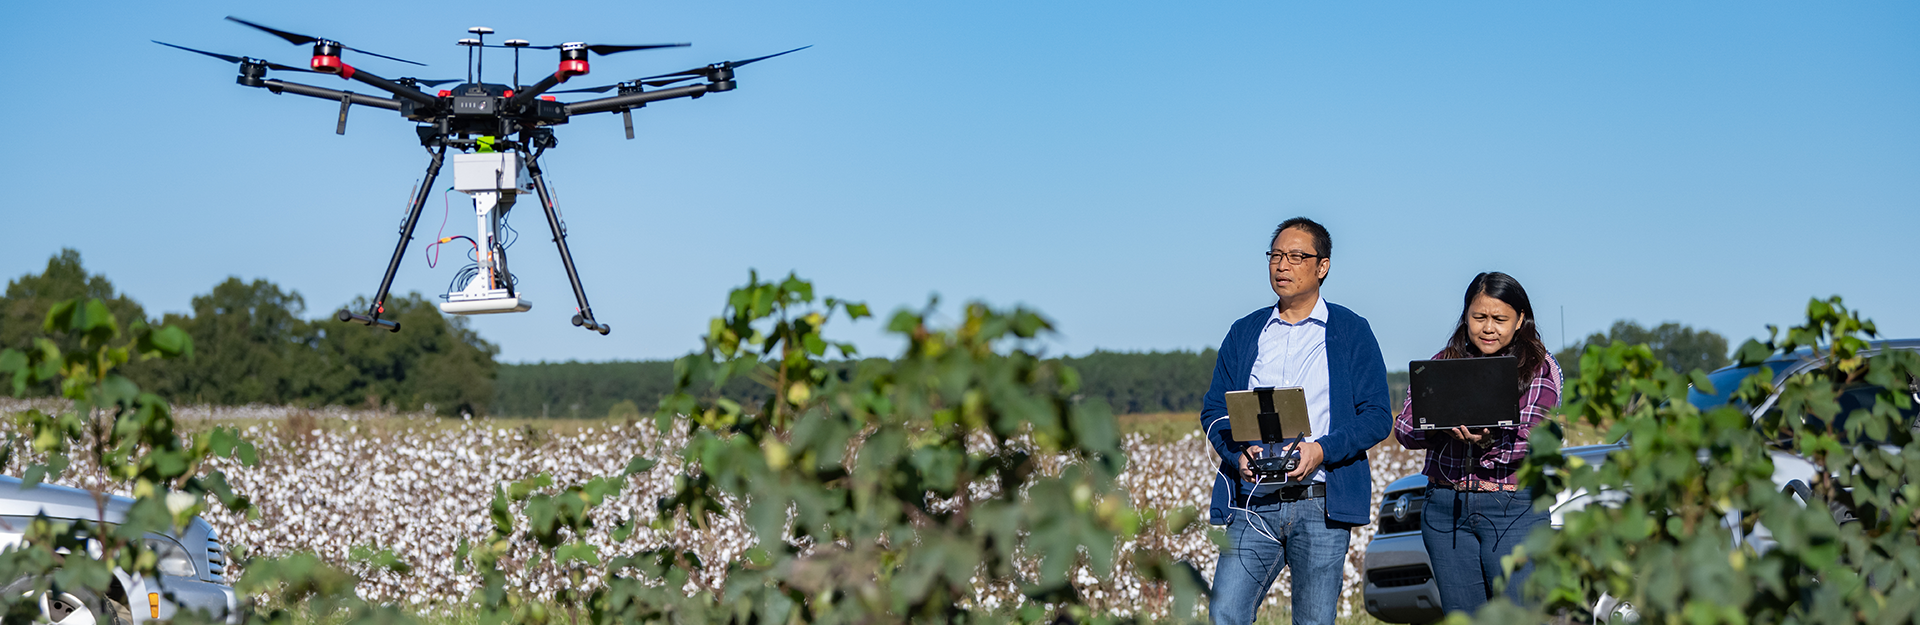 Two researchers flying a drone in a field